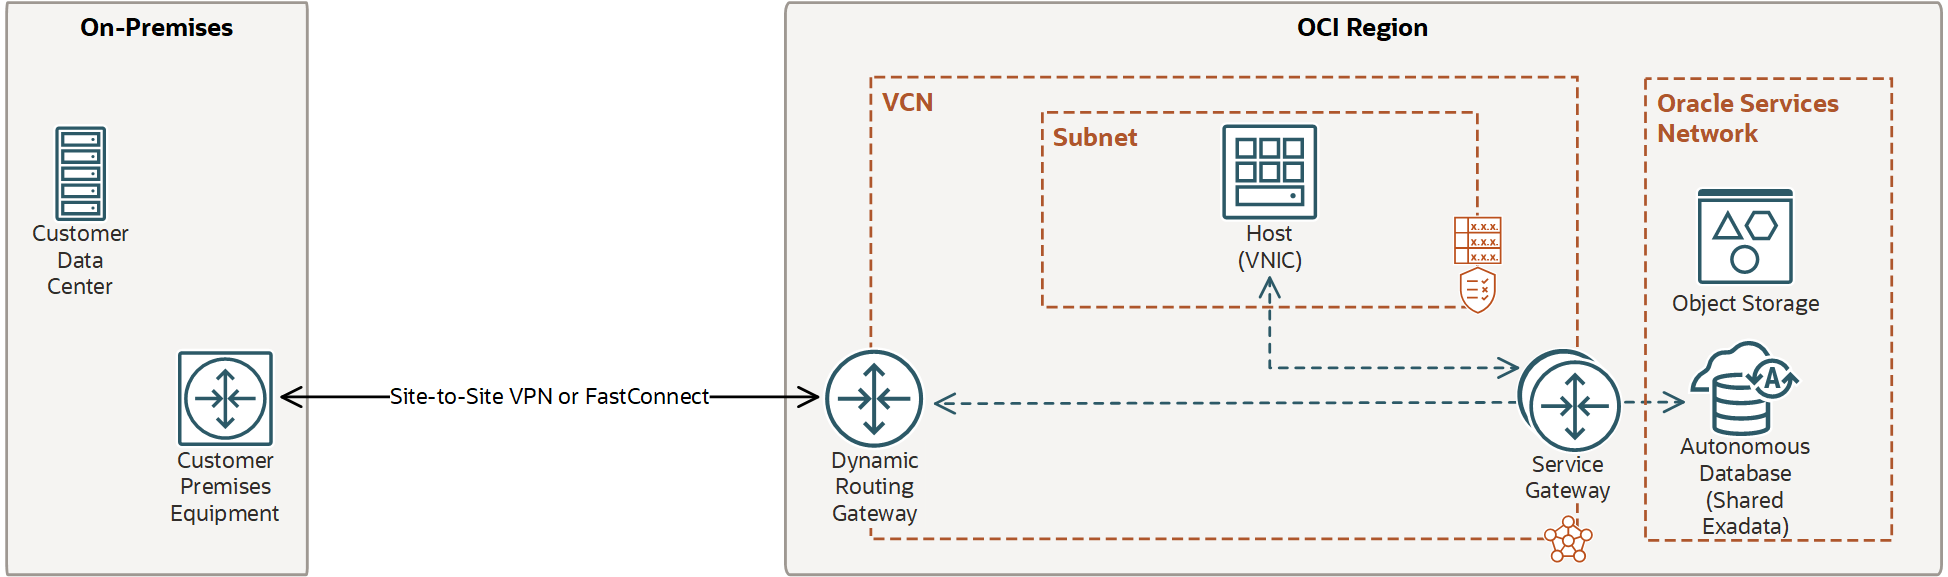 This diagram shows a VCN with a service gateway for access to the Oracle Services Network.